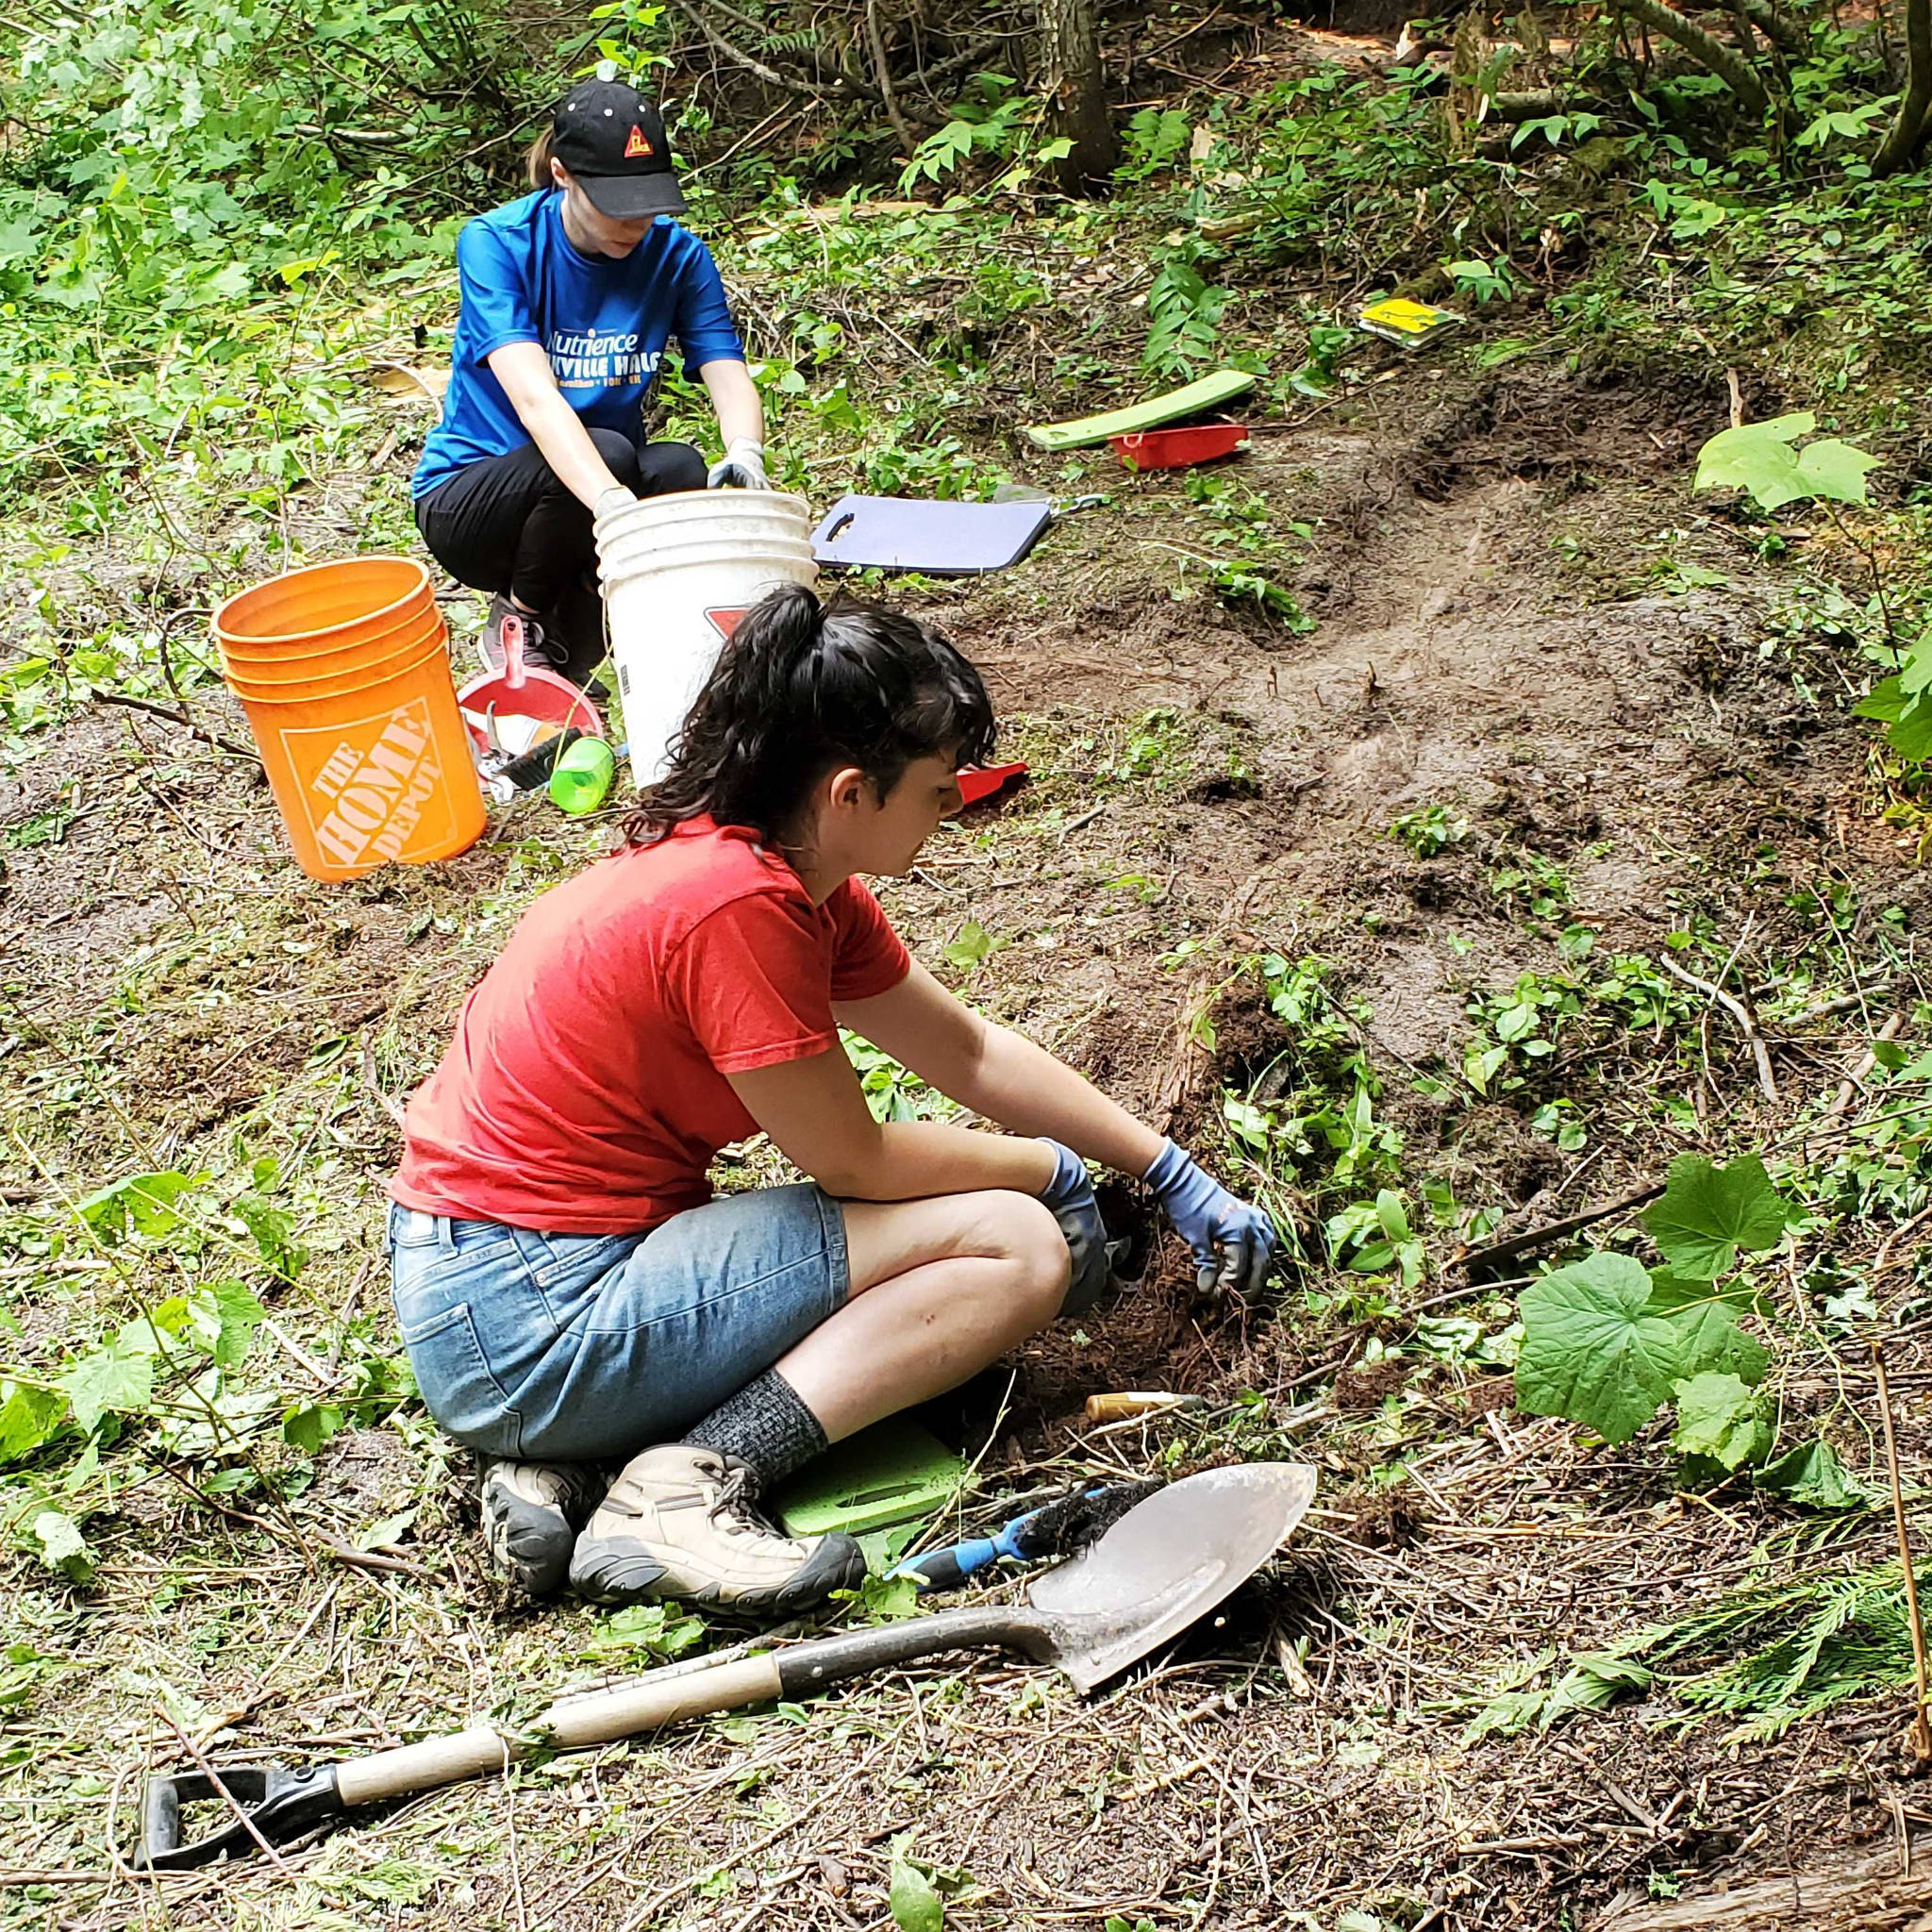 26336117_web1_210909-VMS-cherryville-camp-dig-ARCHAEOLOGY_3